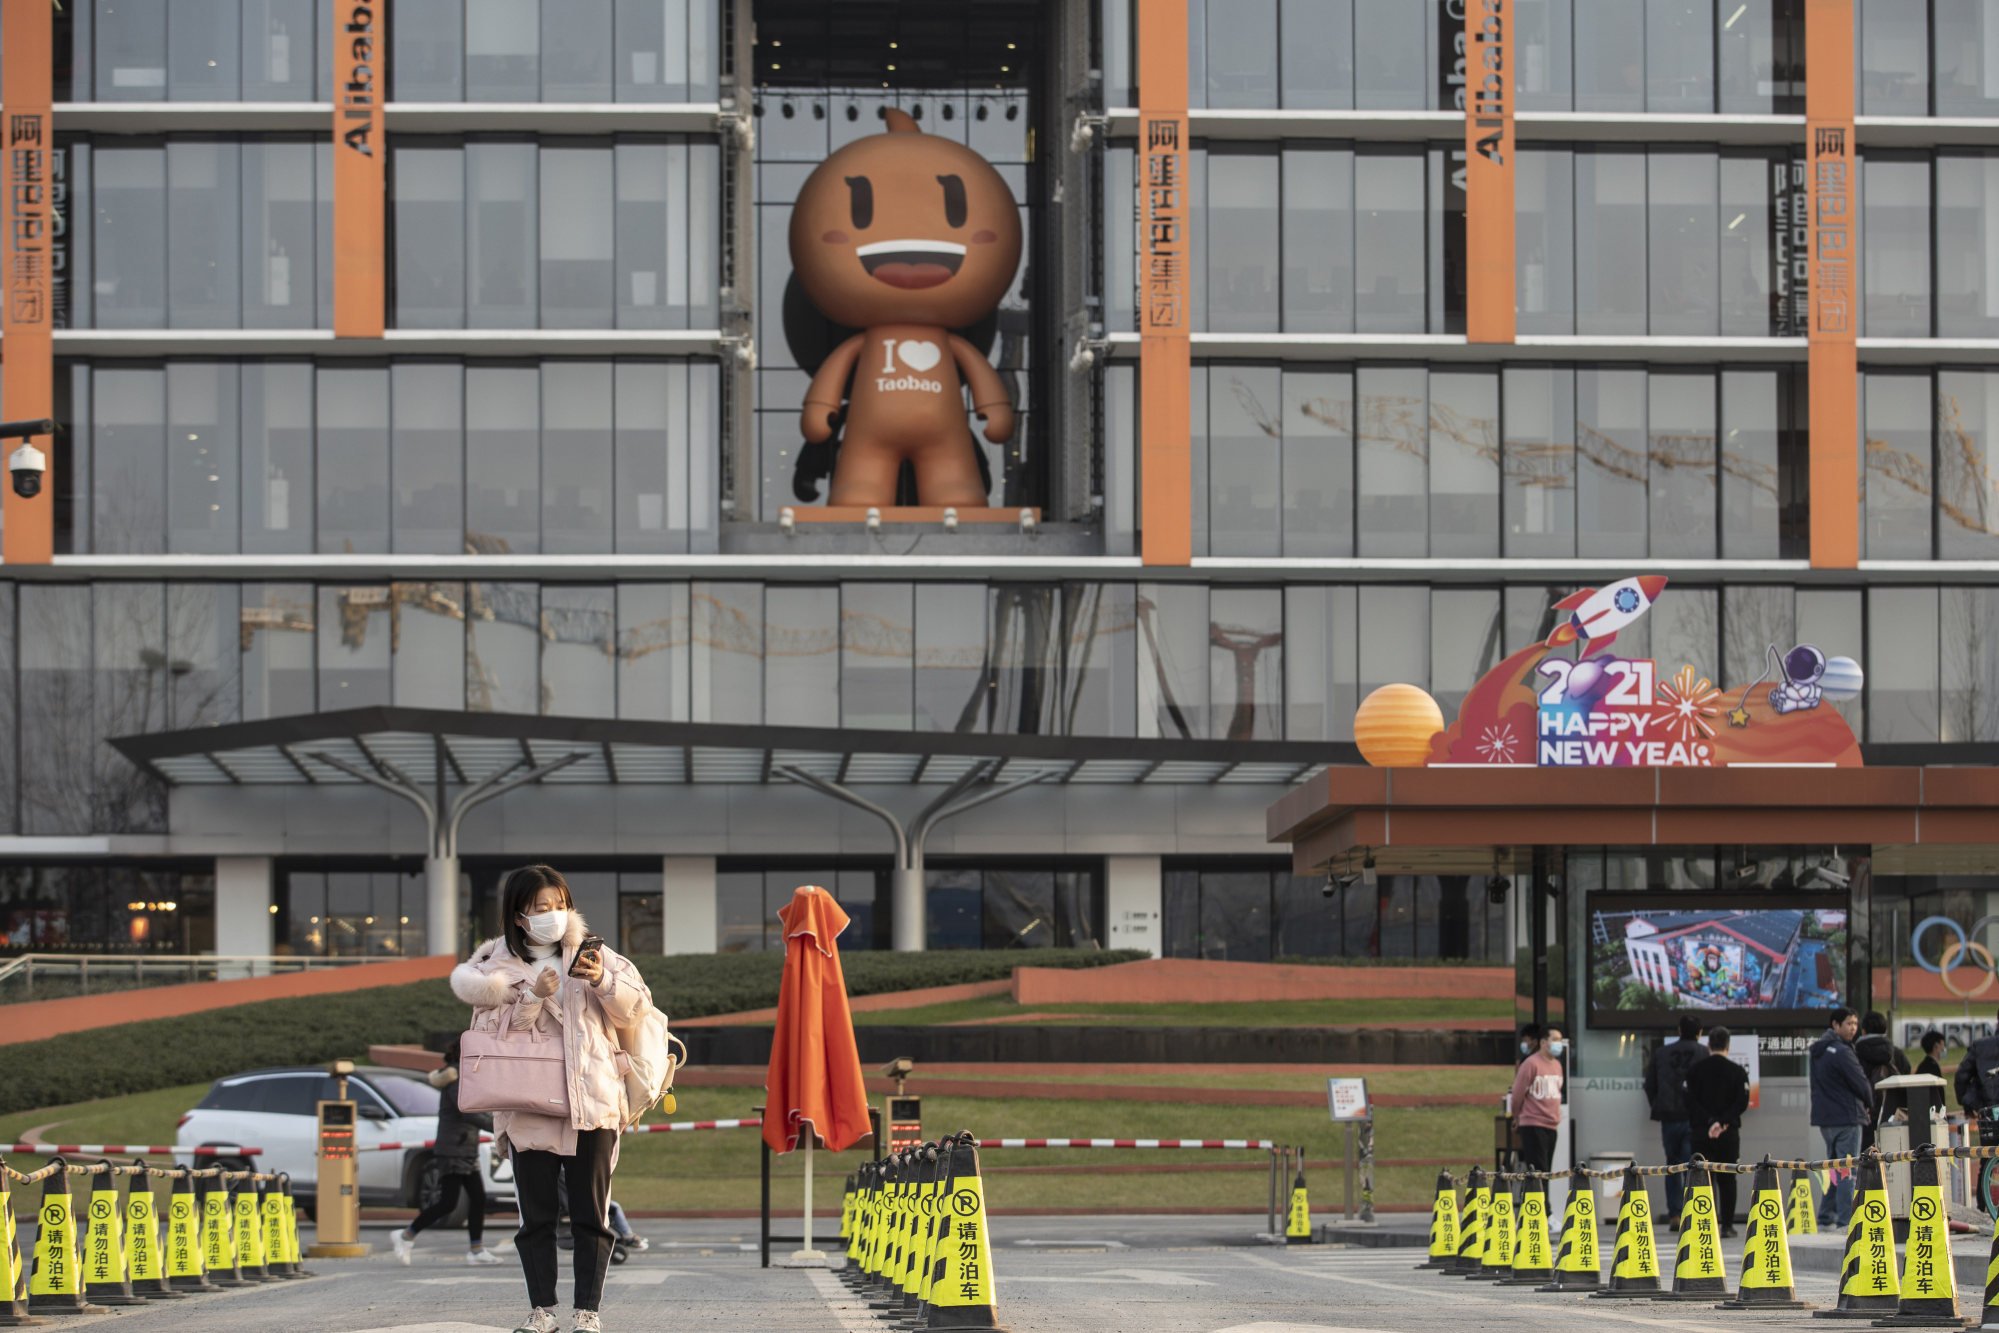 The Alibaba headquarters in Hangzhou, China as seen on January 20, 2021. Photo: Bloomberg